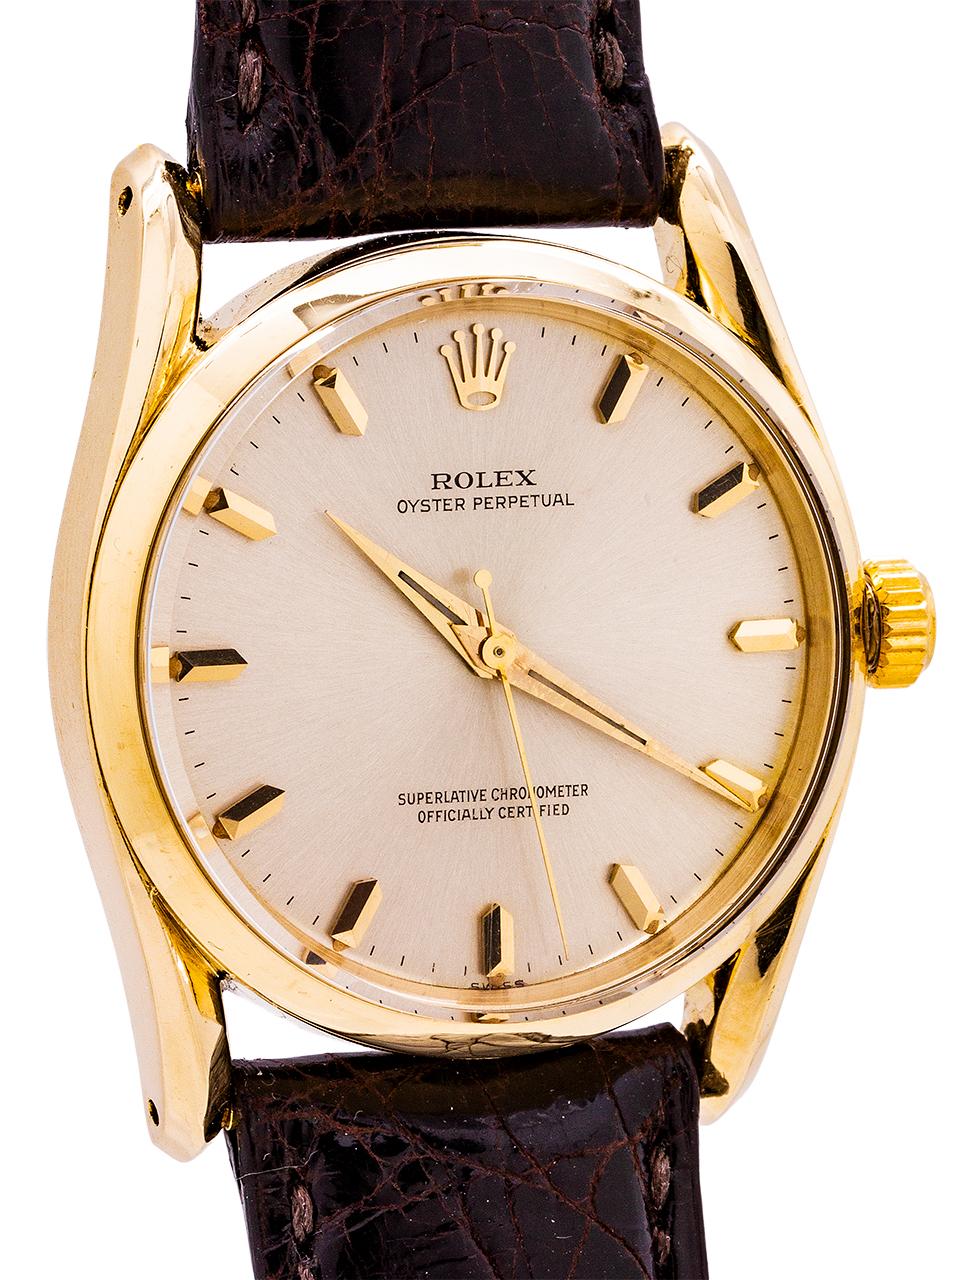 
Rolex Oyster Perpetual so called  “Bombe” model 14K gold ref # 1010 serial# 529,xxx circa 1960. Featuring a 34mm Oyster case with bowed lugs, smooth bezel, acrylic dome style crystal, and beautiful  condition original matte silver dial with applied